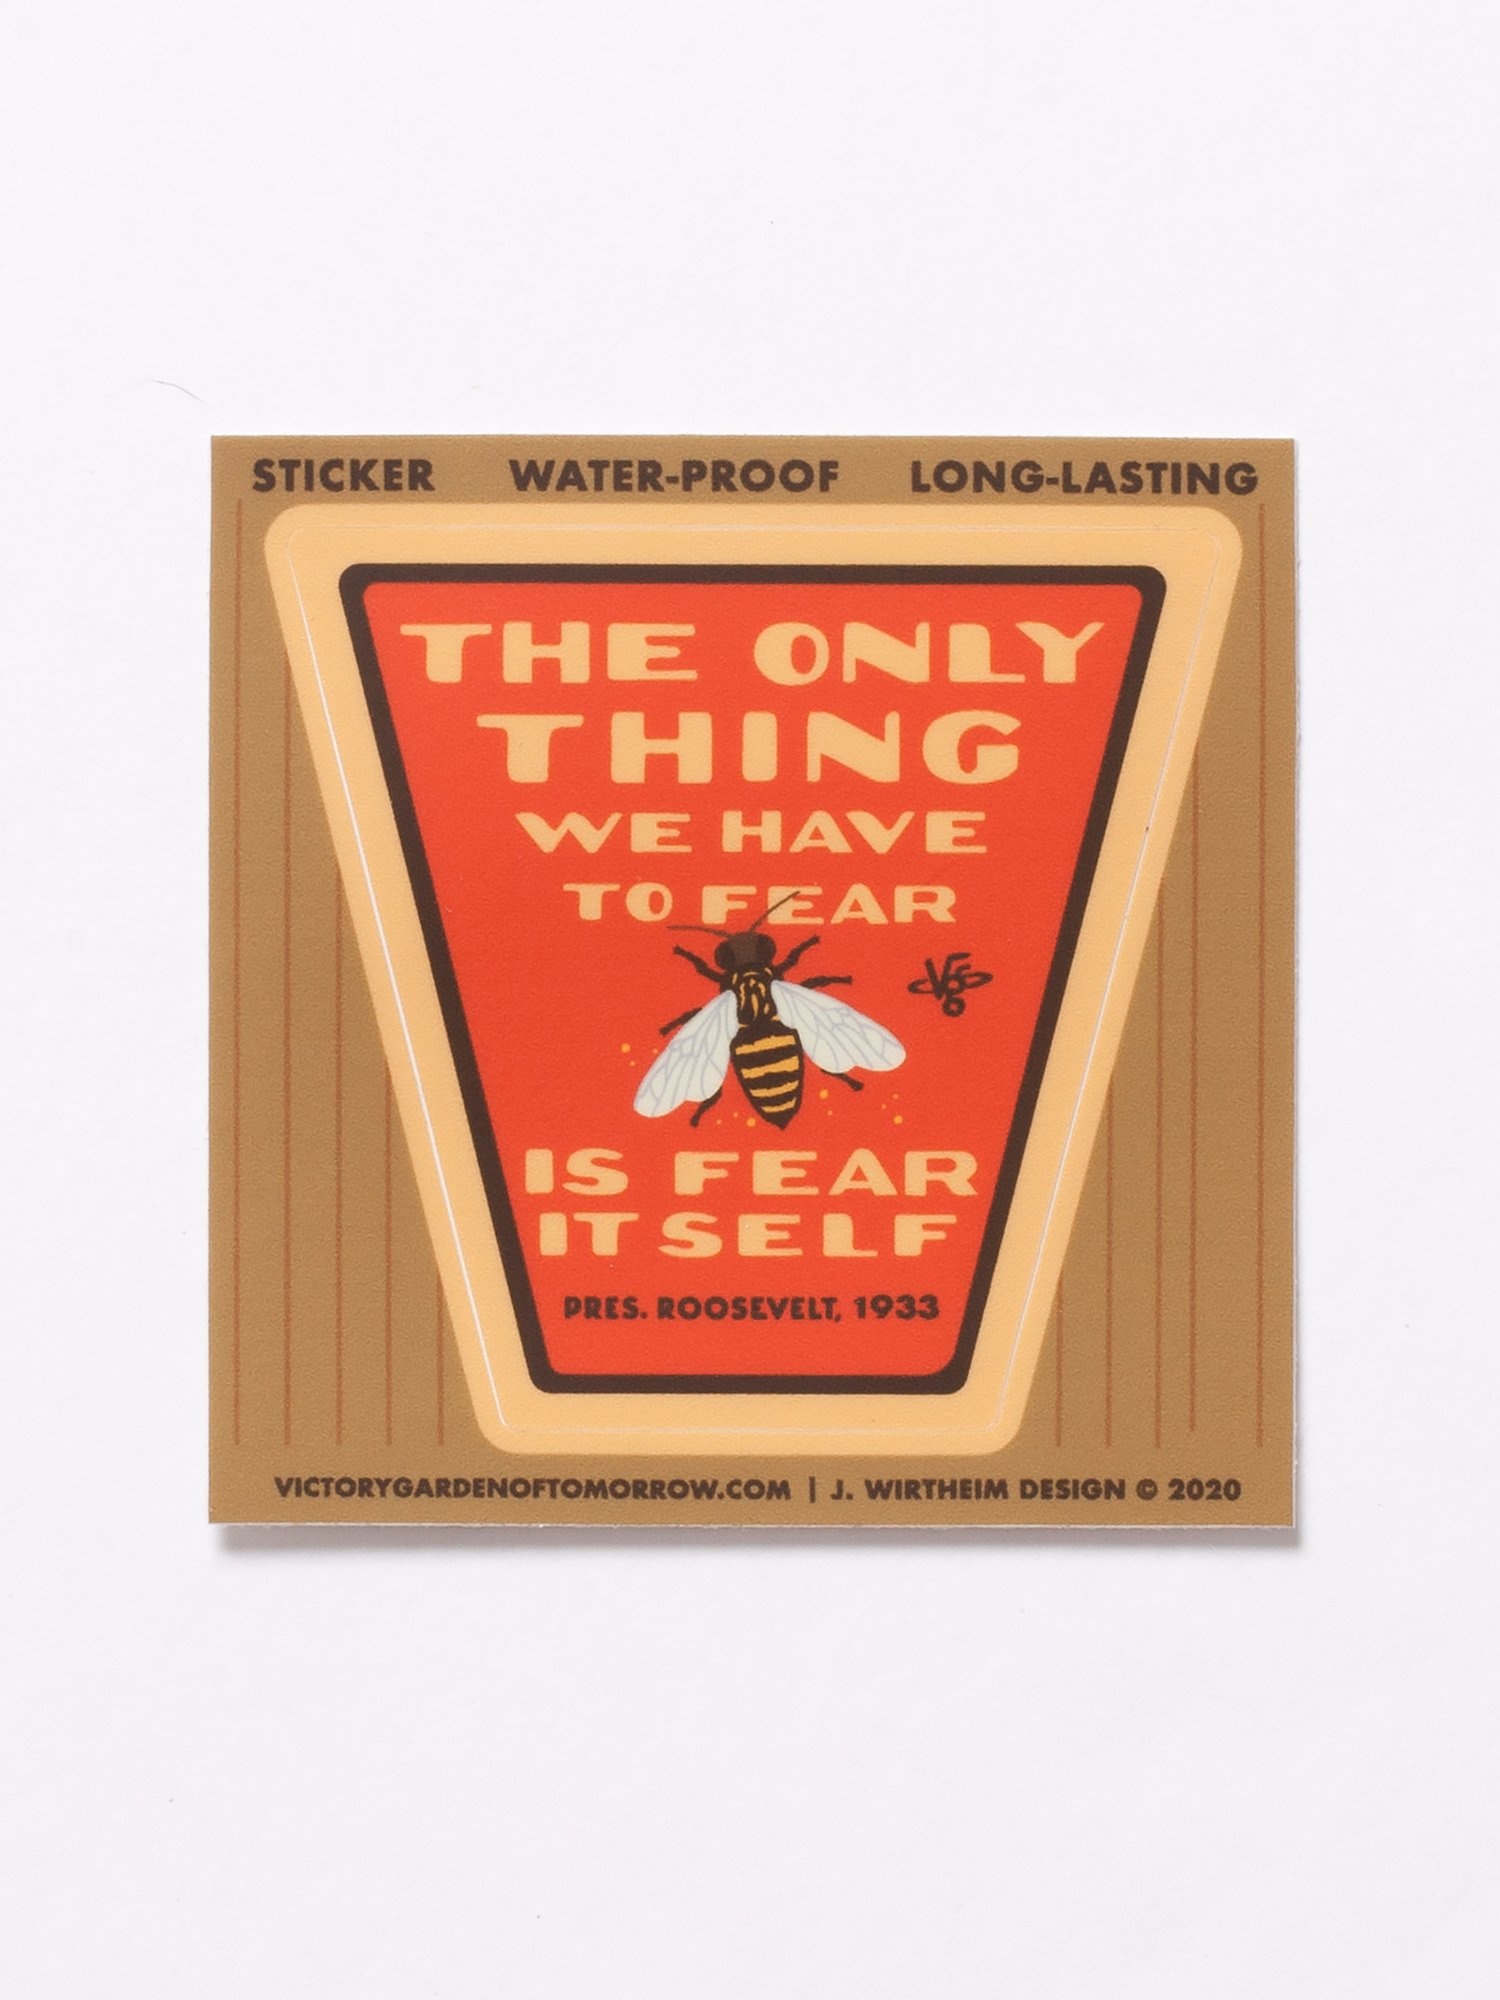 The Only Thing We Have to Fear is Fear Itself Sticker